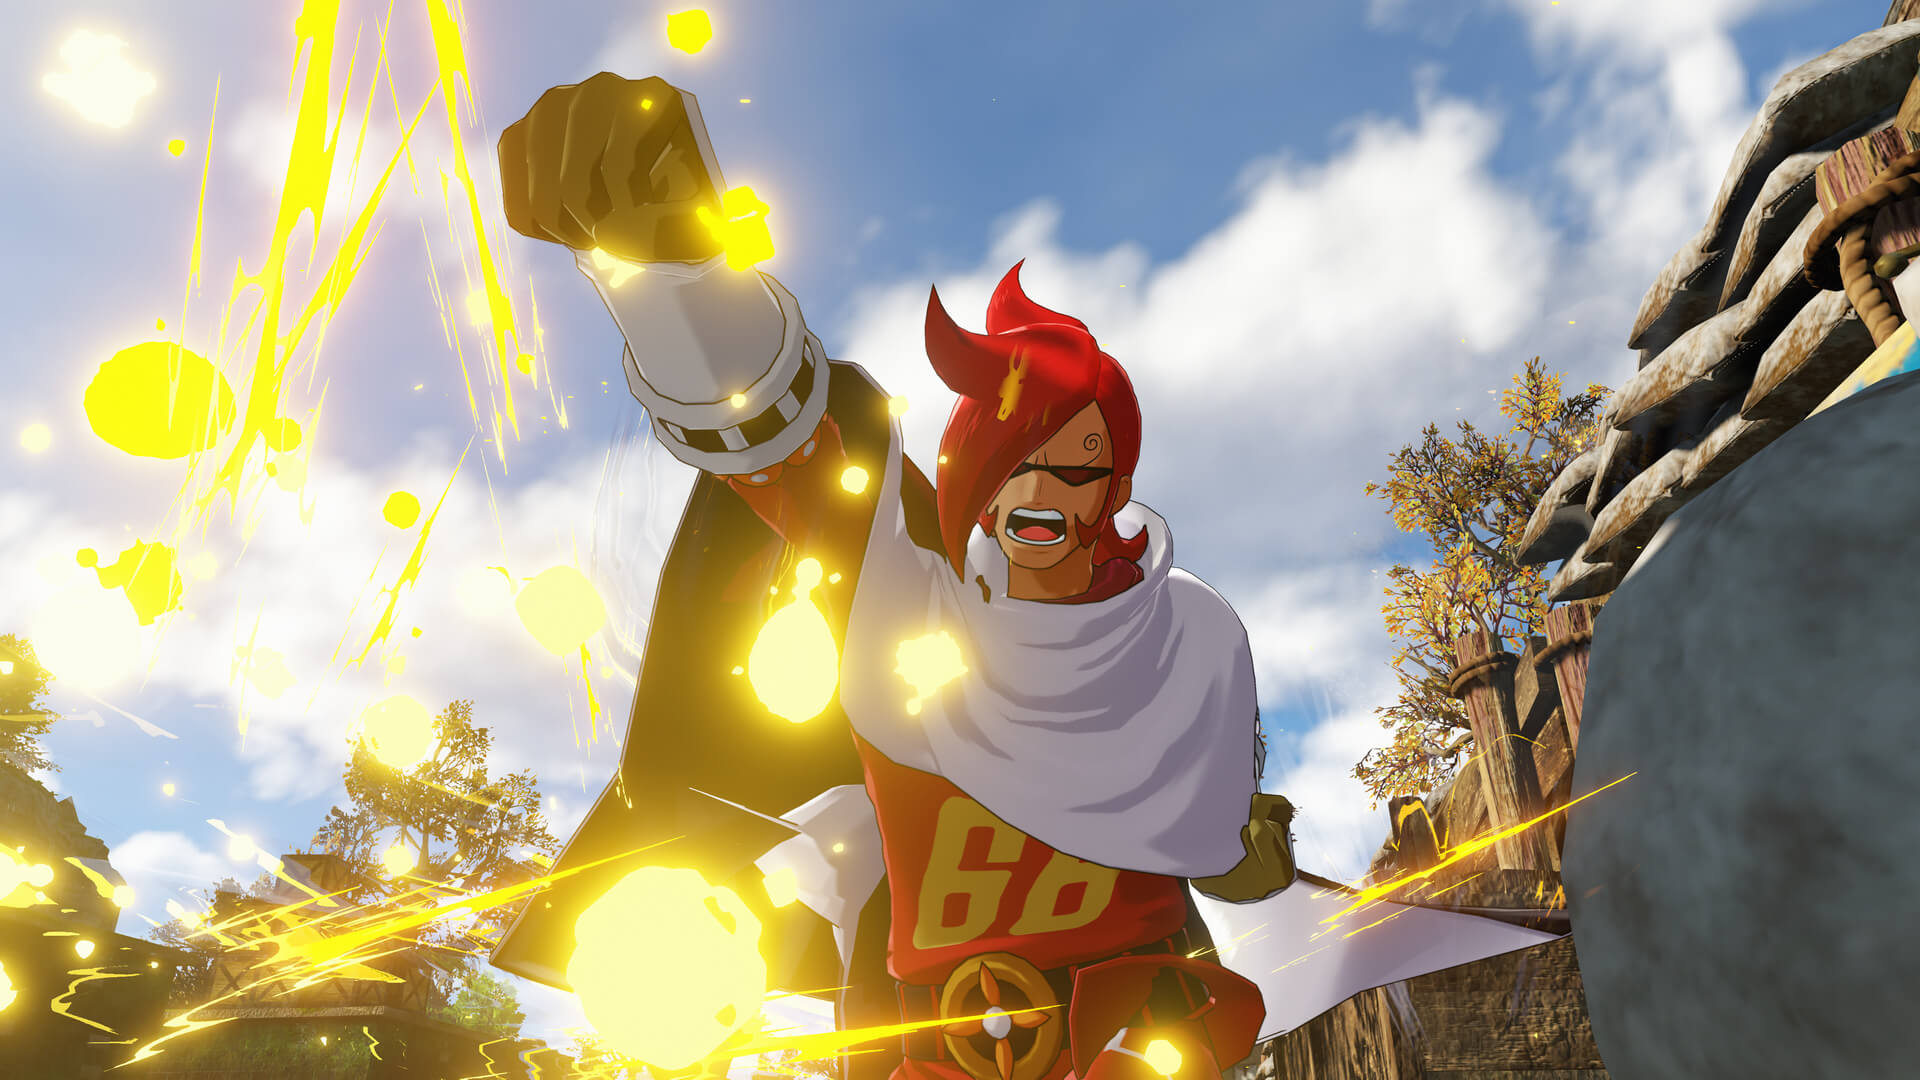 New One Piece World Seeker Screenshots Focus On Germa 66 And The Vinsmoke Family